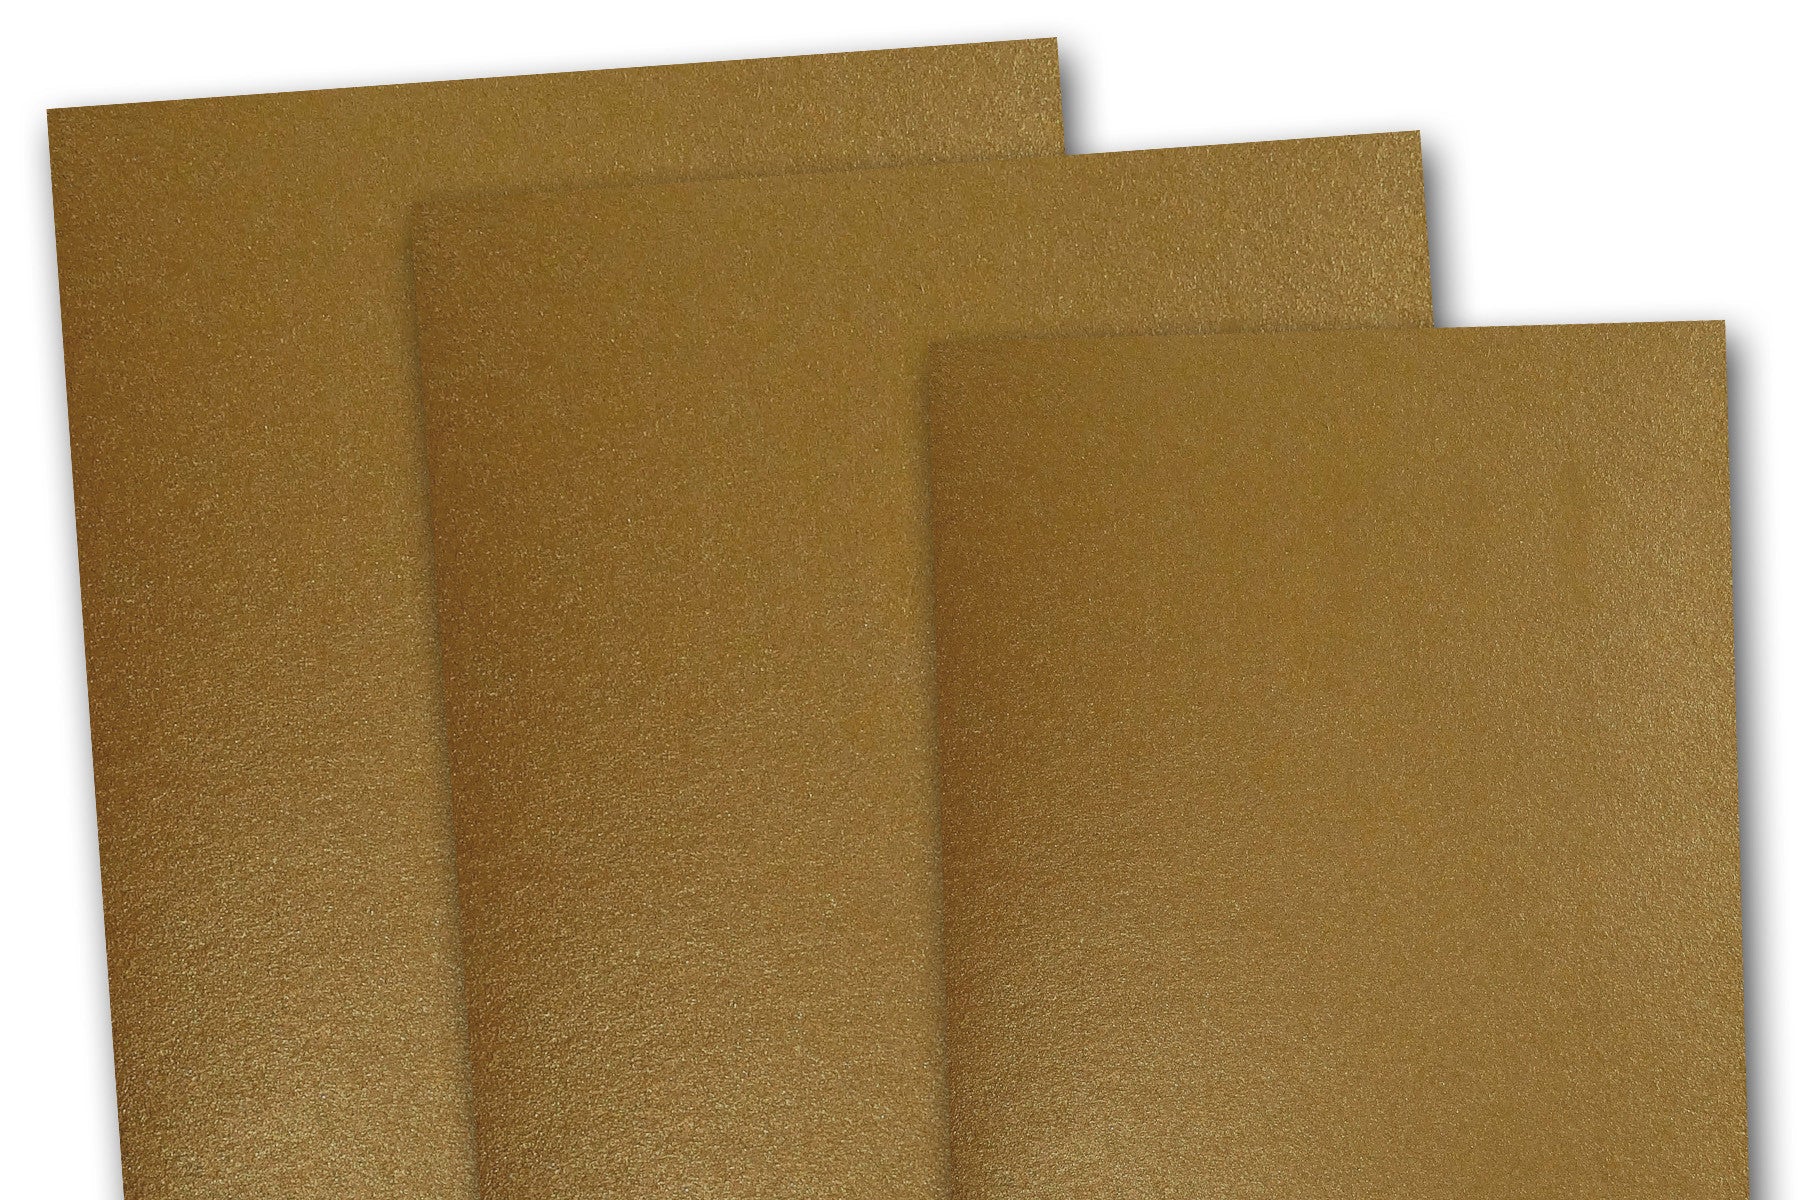 Metallic ANTIQUE GOLD Card Stock for DIY Invitations and holiday